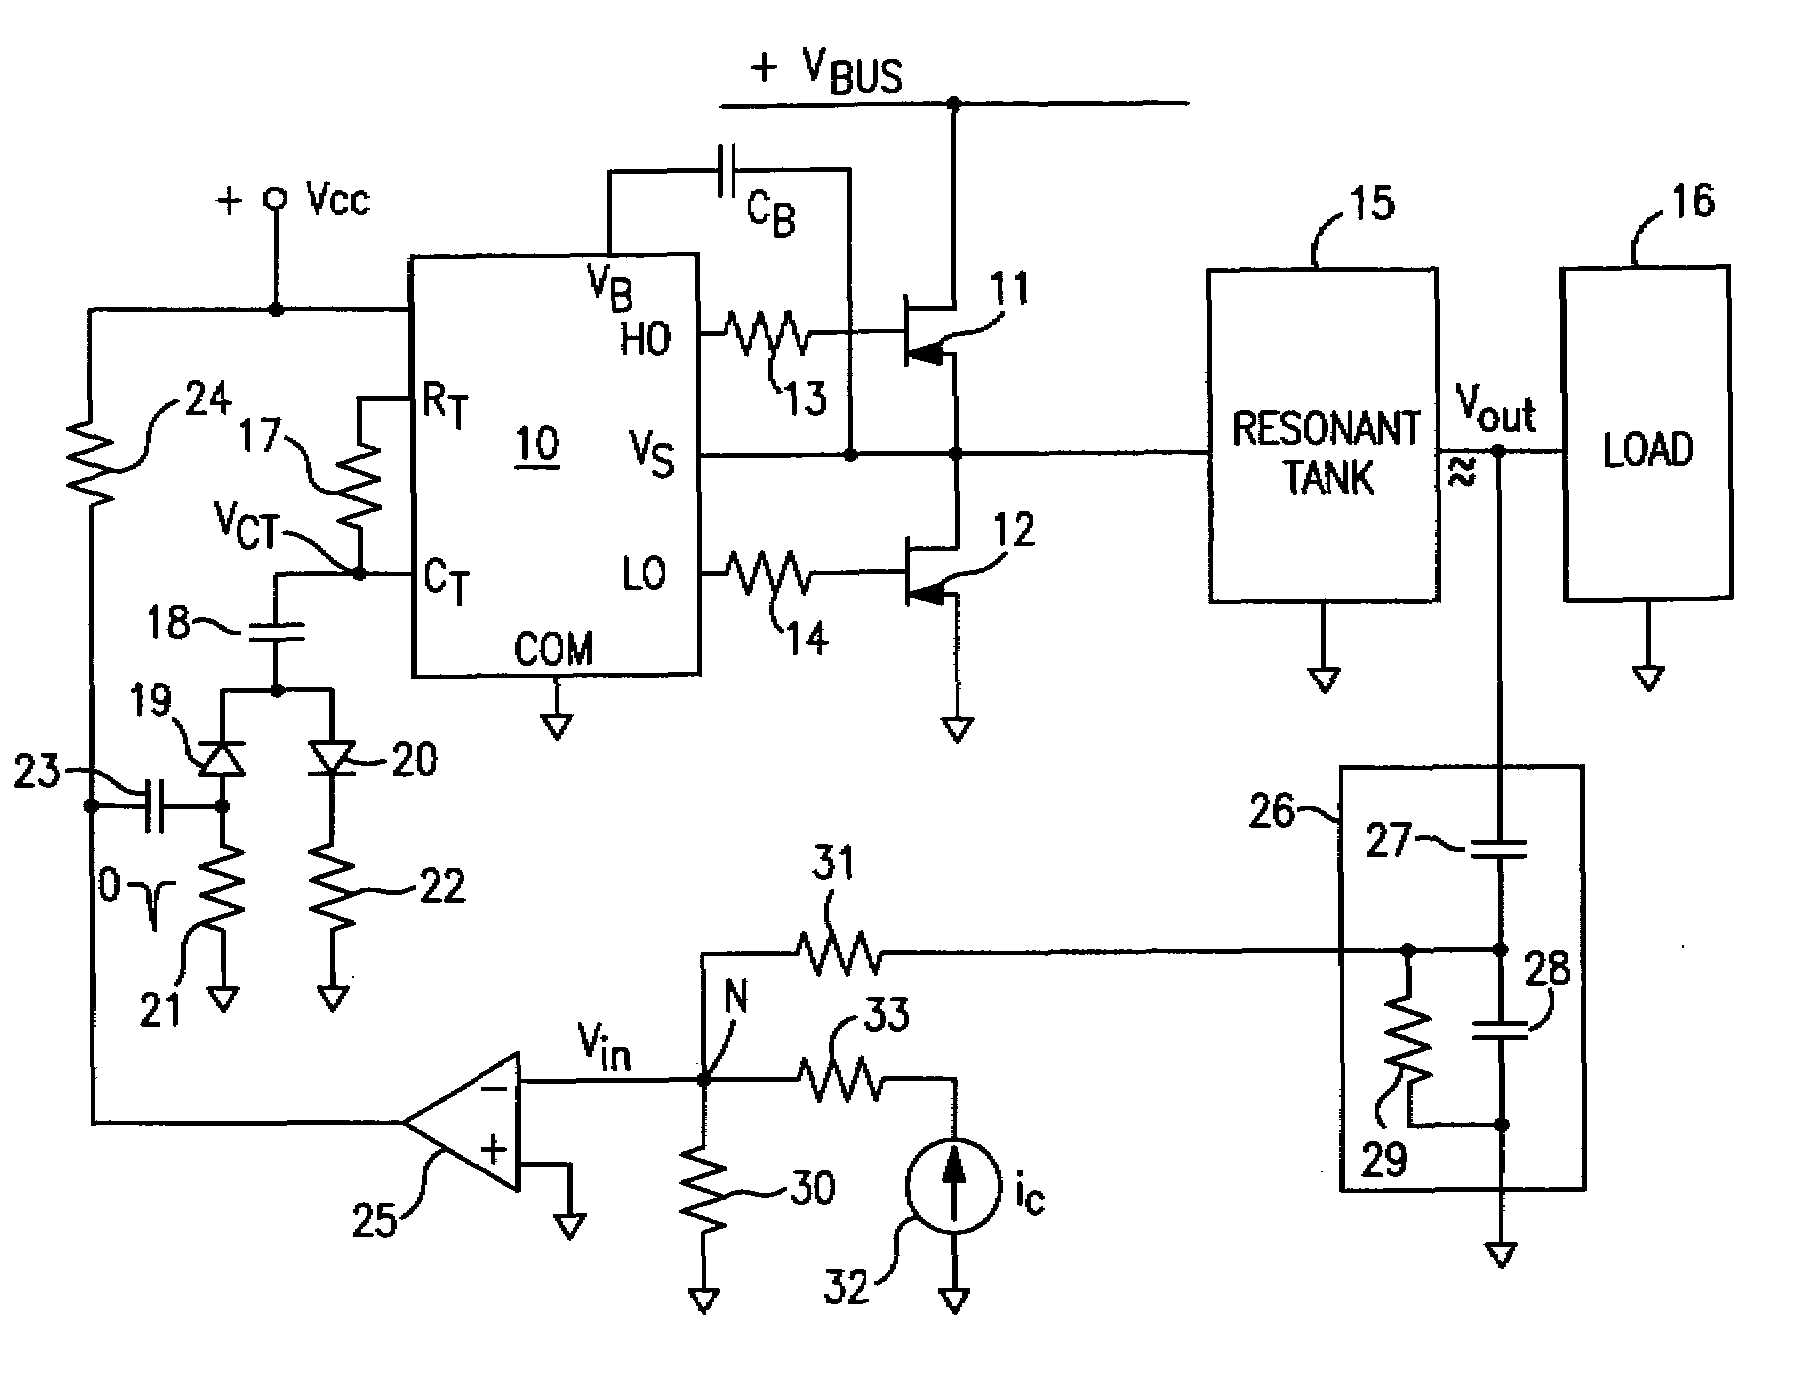 Control system for a resonant inverter with a self-oscillating driver